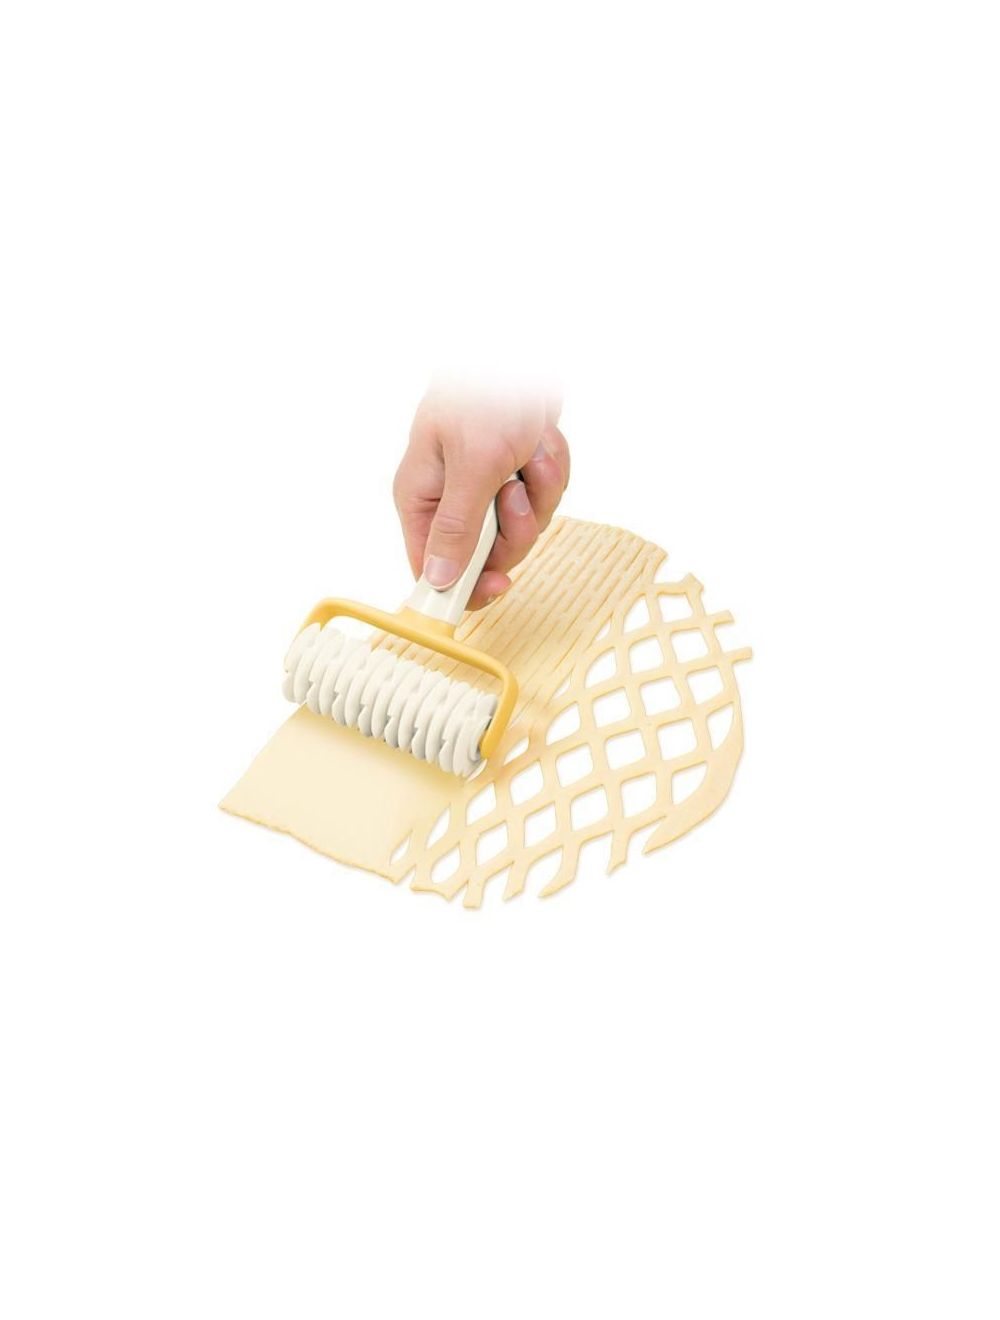 Delicia Textured Rolling Pin